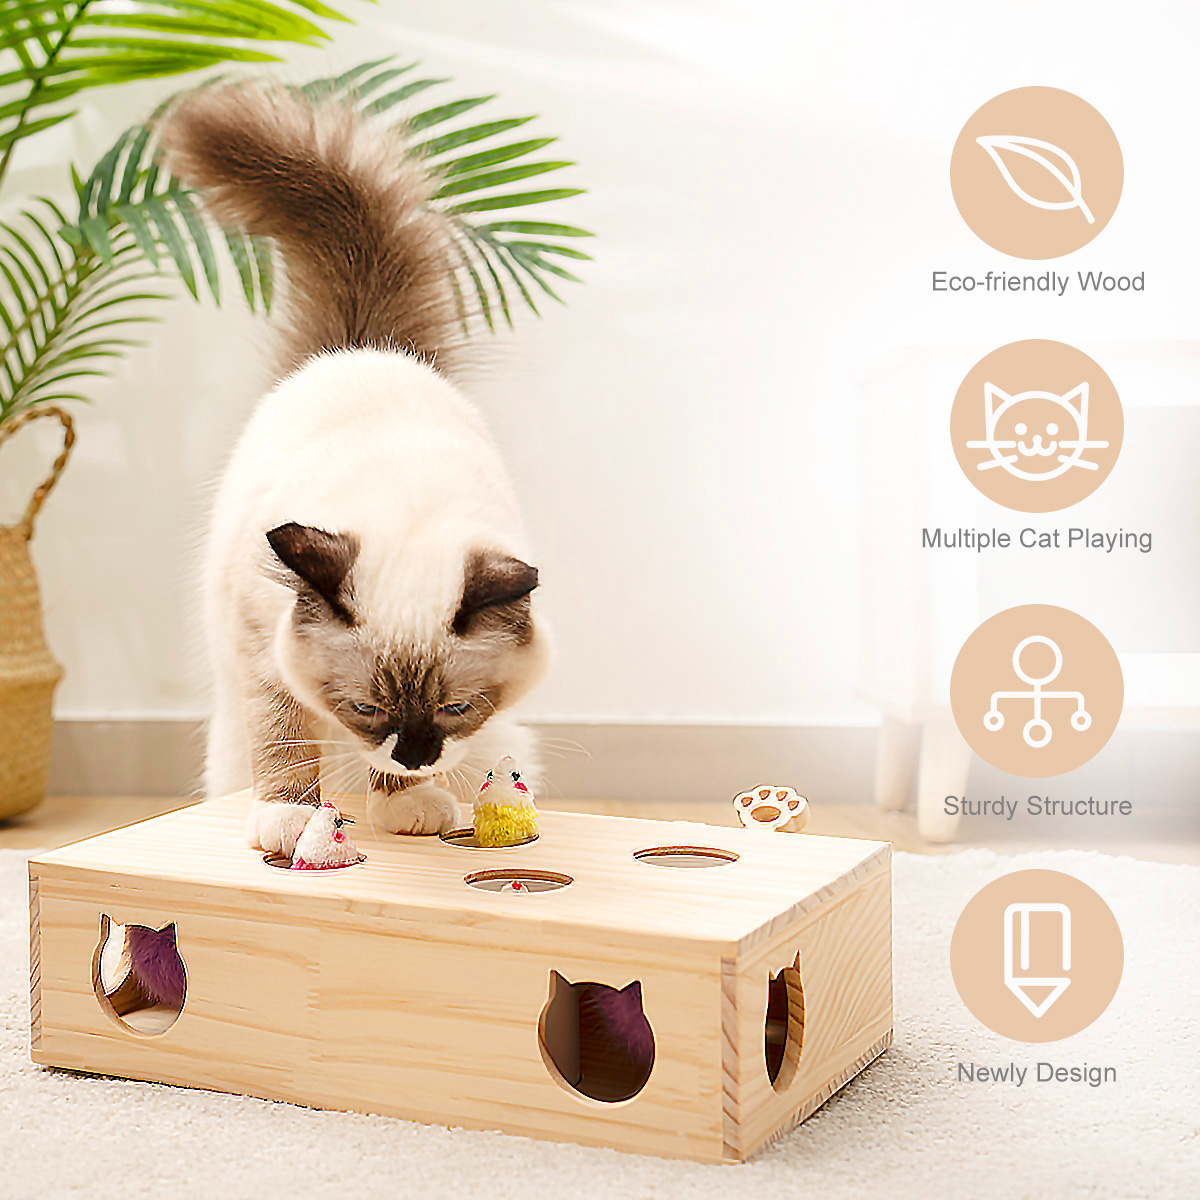 New MewooFun Cat Toys Interactive Whack-a-mole Solid Wood Toys for